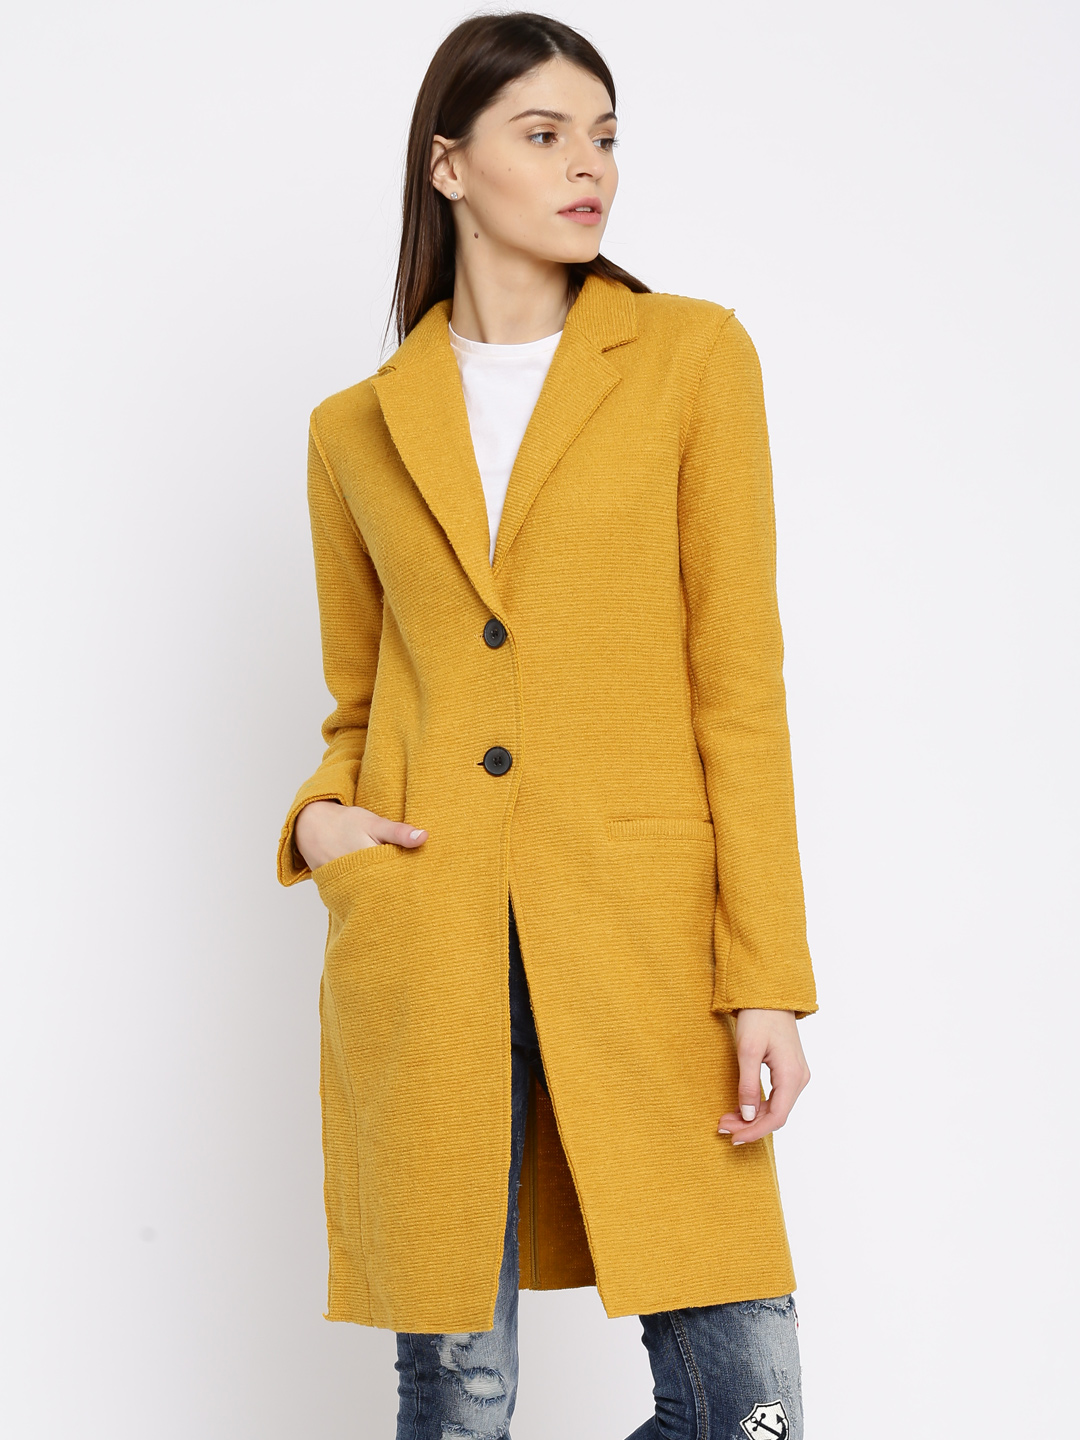 ONLY Mustard Yellow Coat